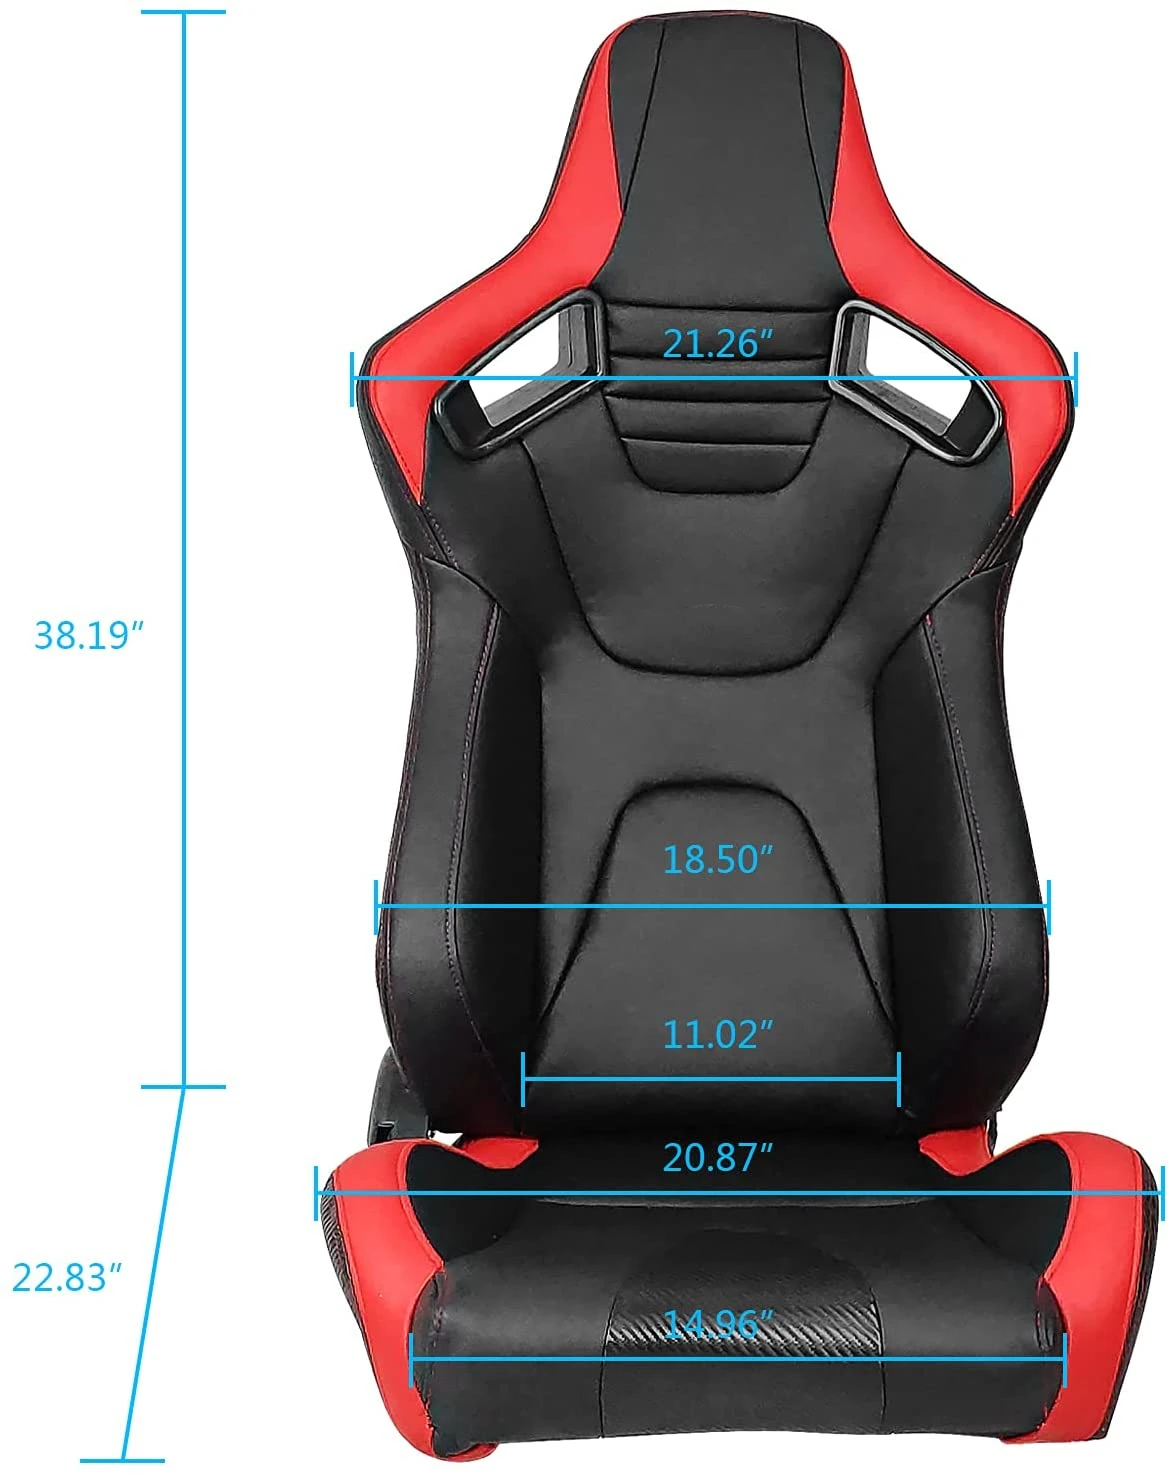 PVC Leather racing seat manufacturer